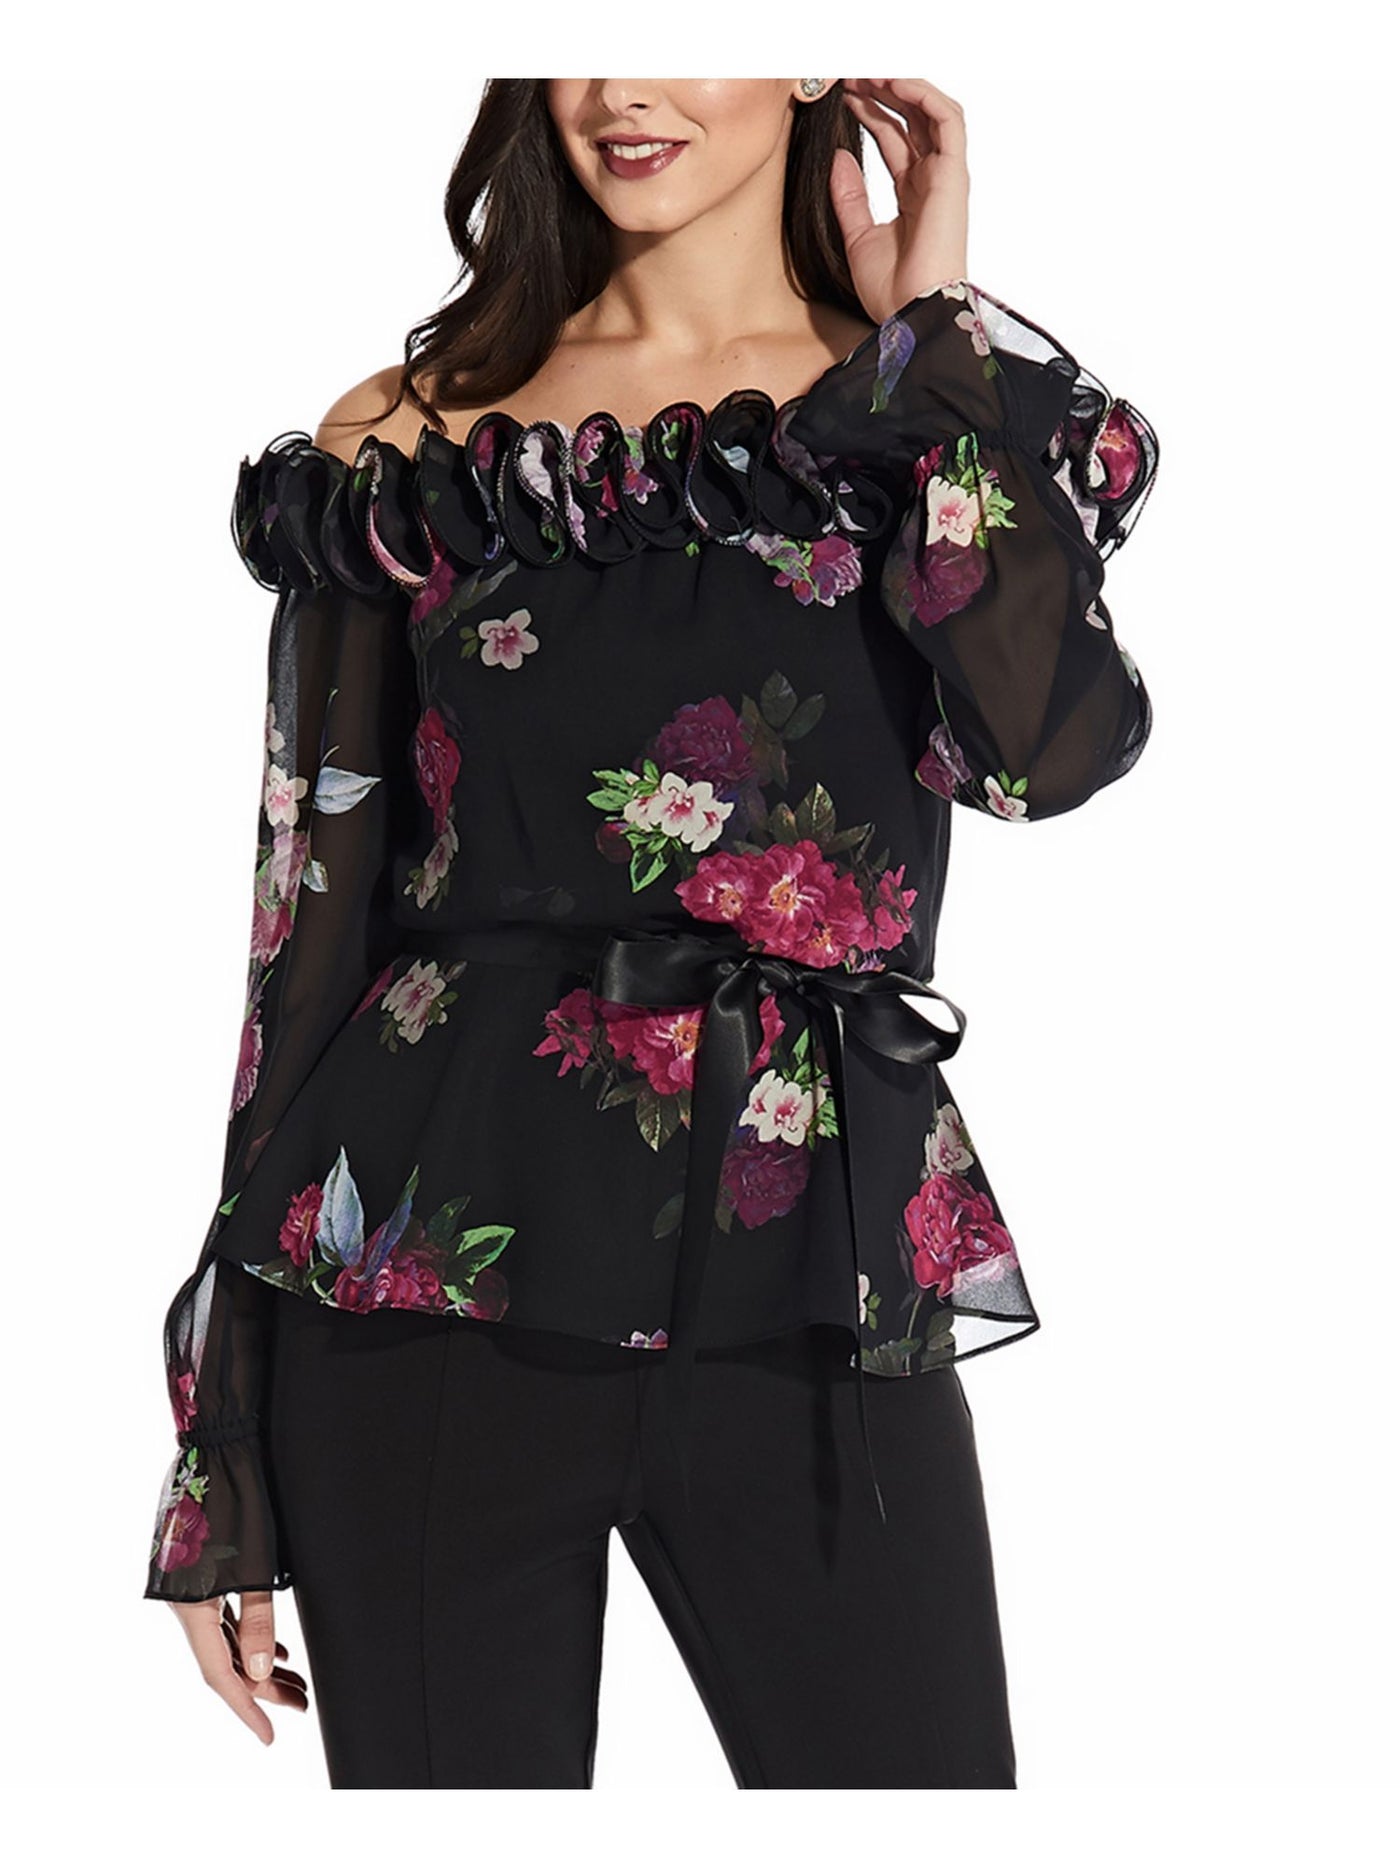 ADRIANNA PAPELL Womens Black Ruffled Belted Elastic Waist Lined Floral Long Sleeve Off Shoulder Evening Top 4